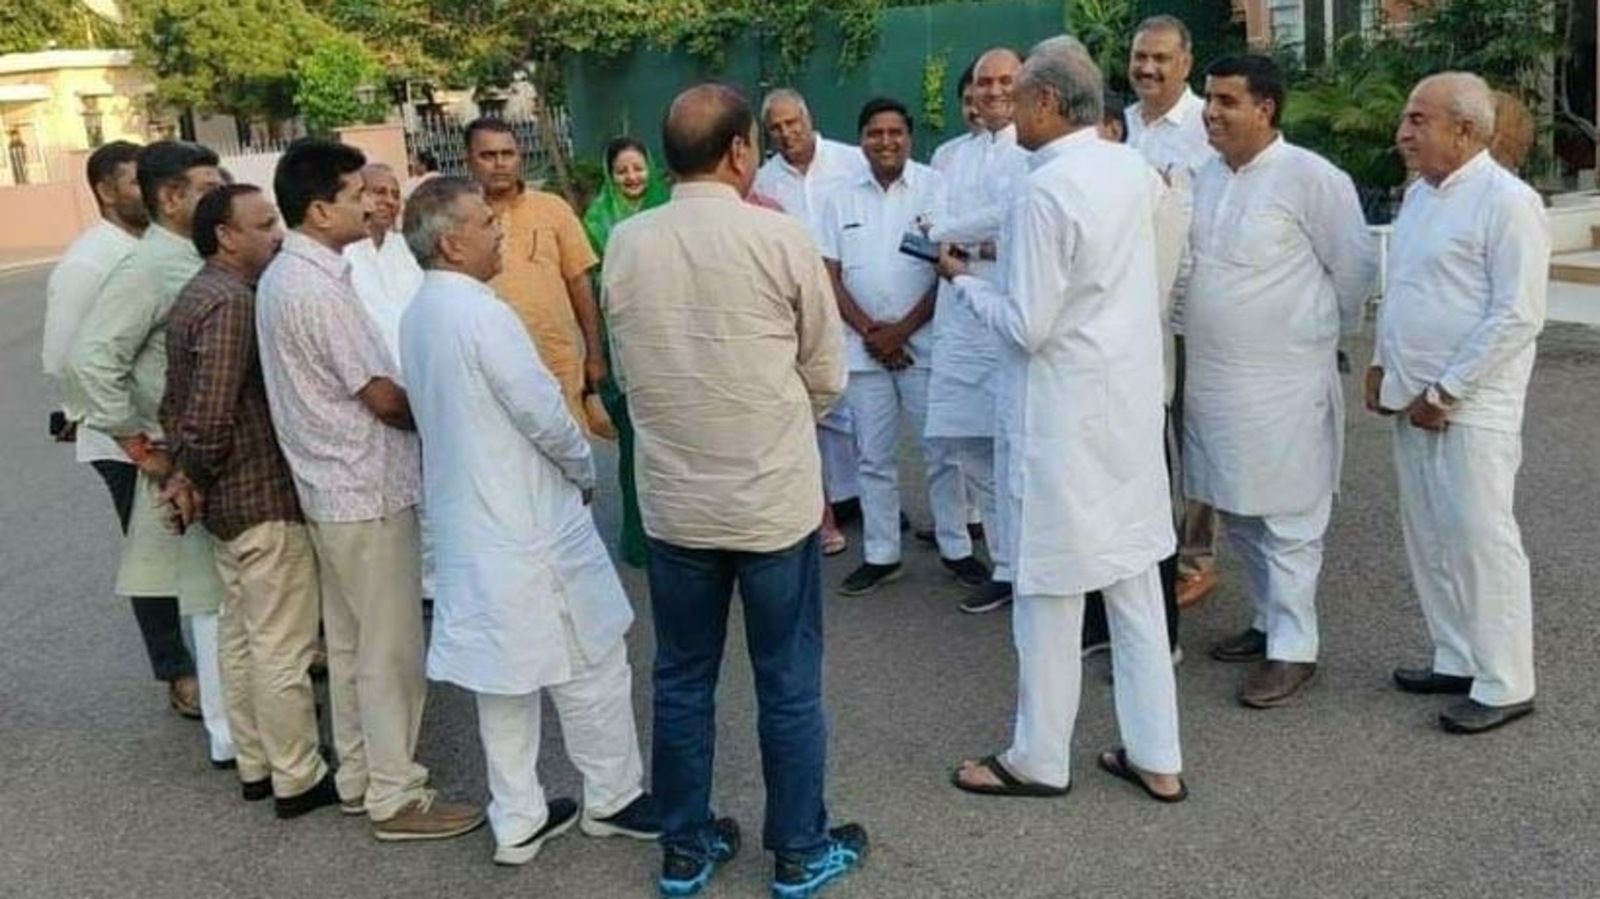 rajasthan-ministers-mlas-at-gehlot-s-residence-as-cong-tries-to-allay-crisis